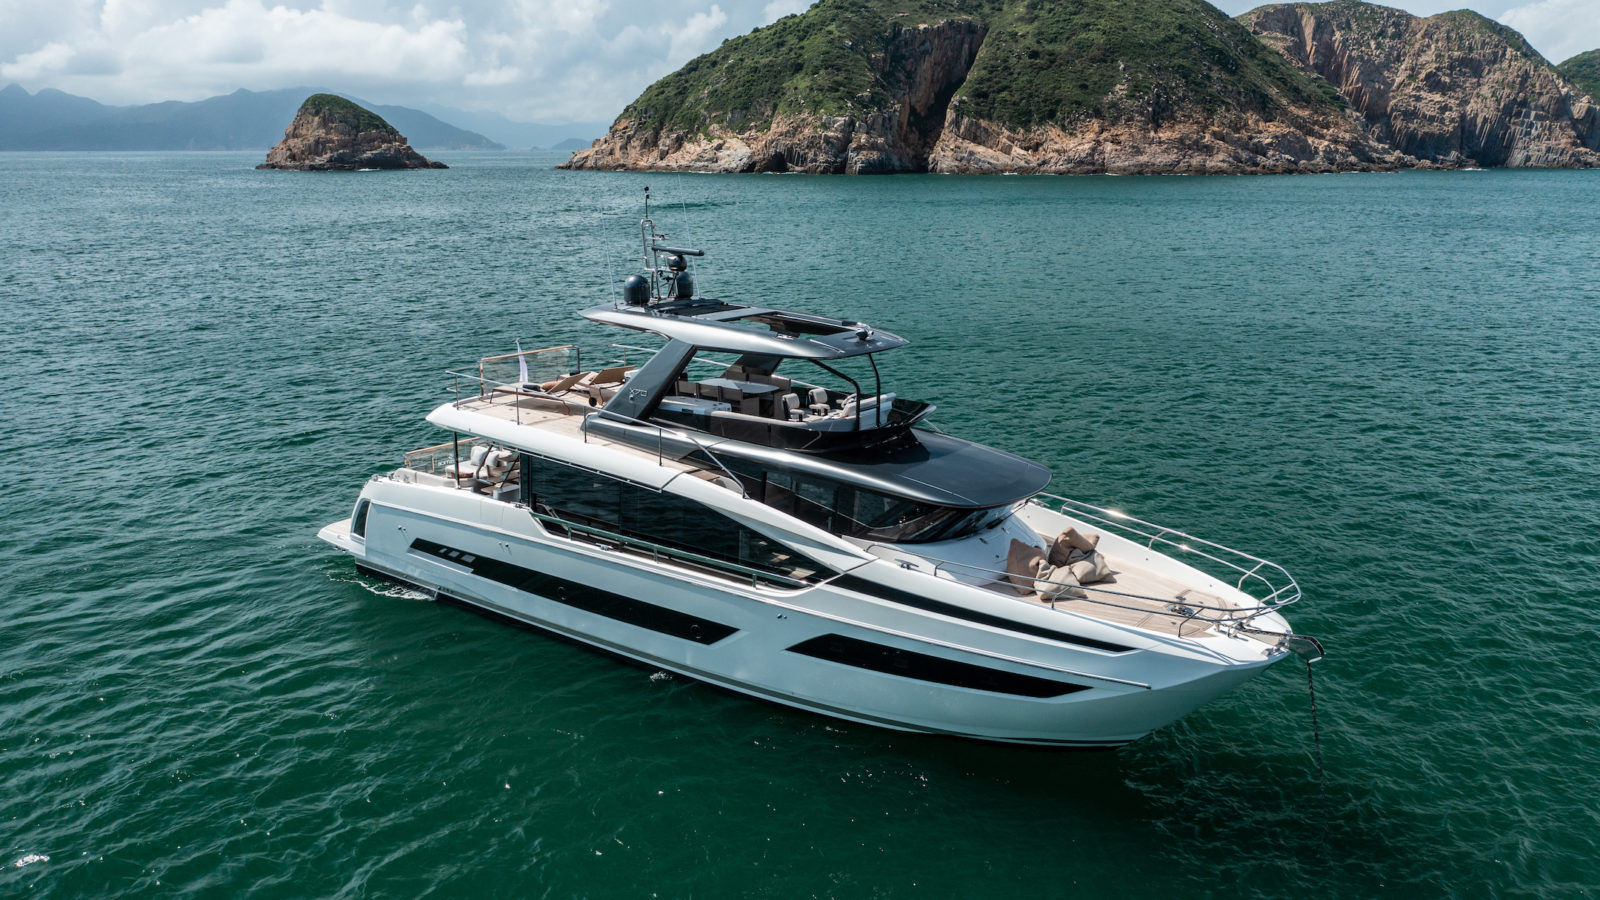 Prestige Yachts Stunning New X70 Flagship: Your Luxury Home at Sea